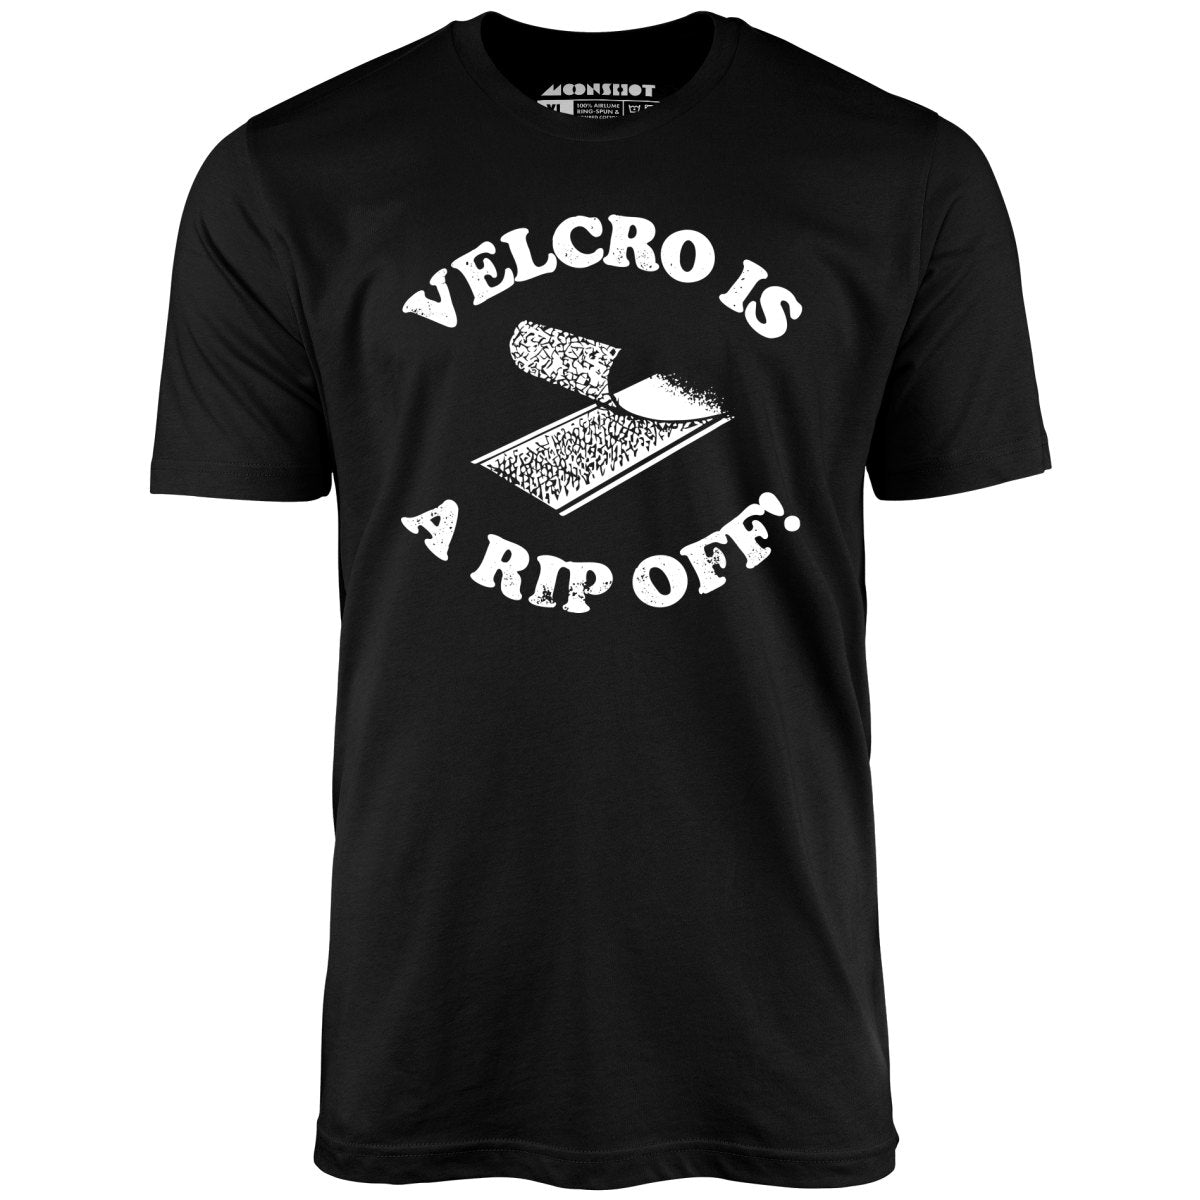 Velcro is a Rip Off - Unisex T-Shirt